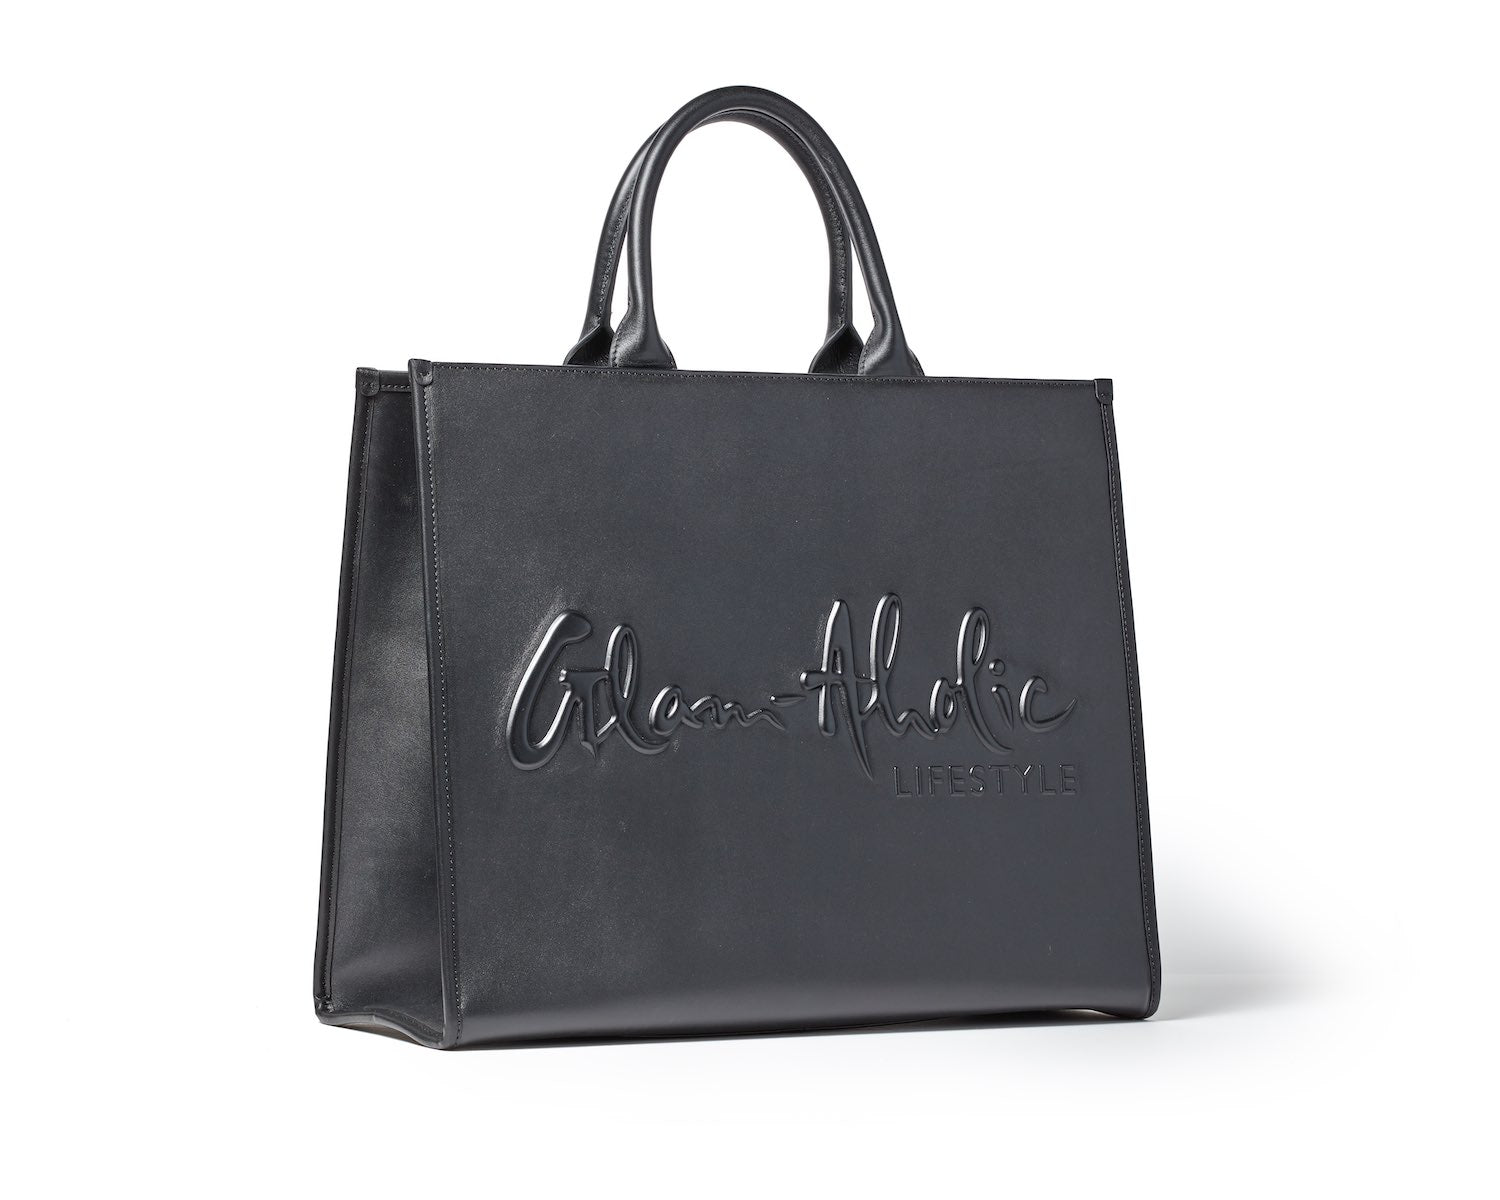 SIGNATURE LUXE TOTE – Glam-Aholic Lifestyle